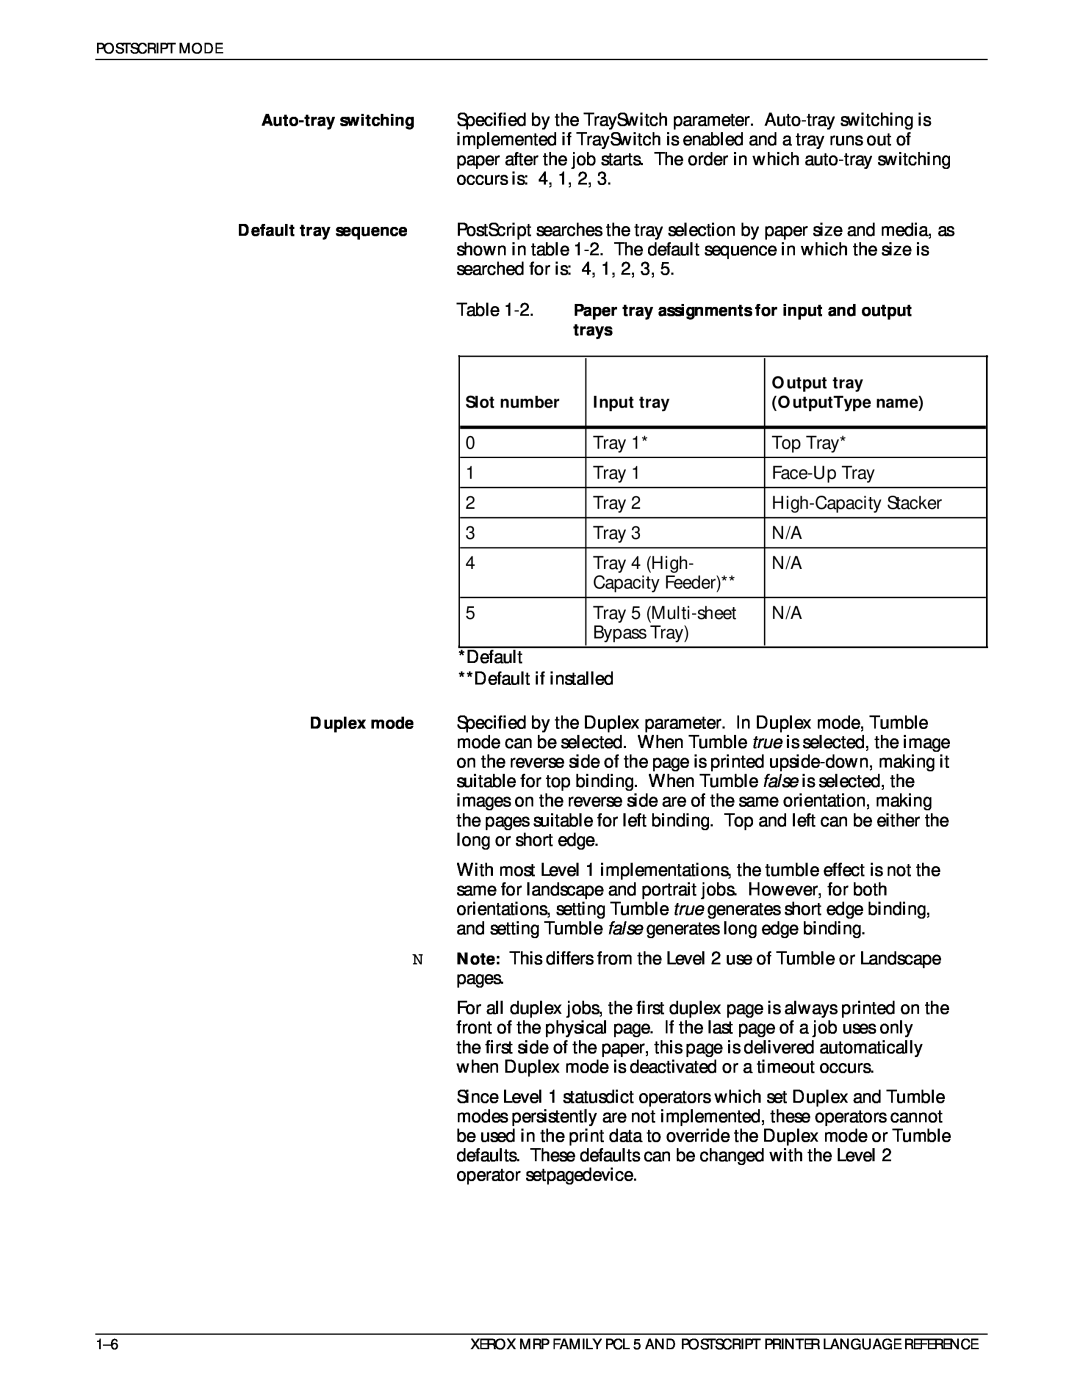 Xerox 4215/MRP Paper tray assignments for input and output, trays, Output tray, Slot number, Input tray, OutputType name 